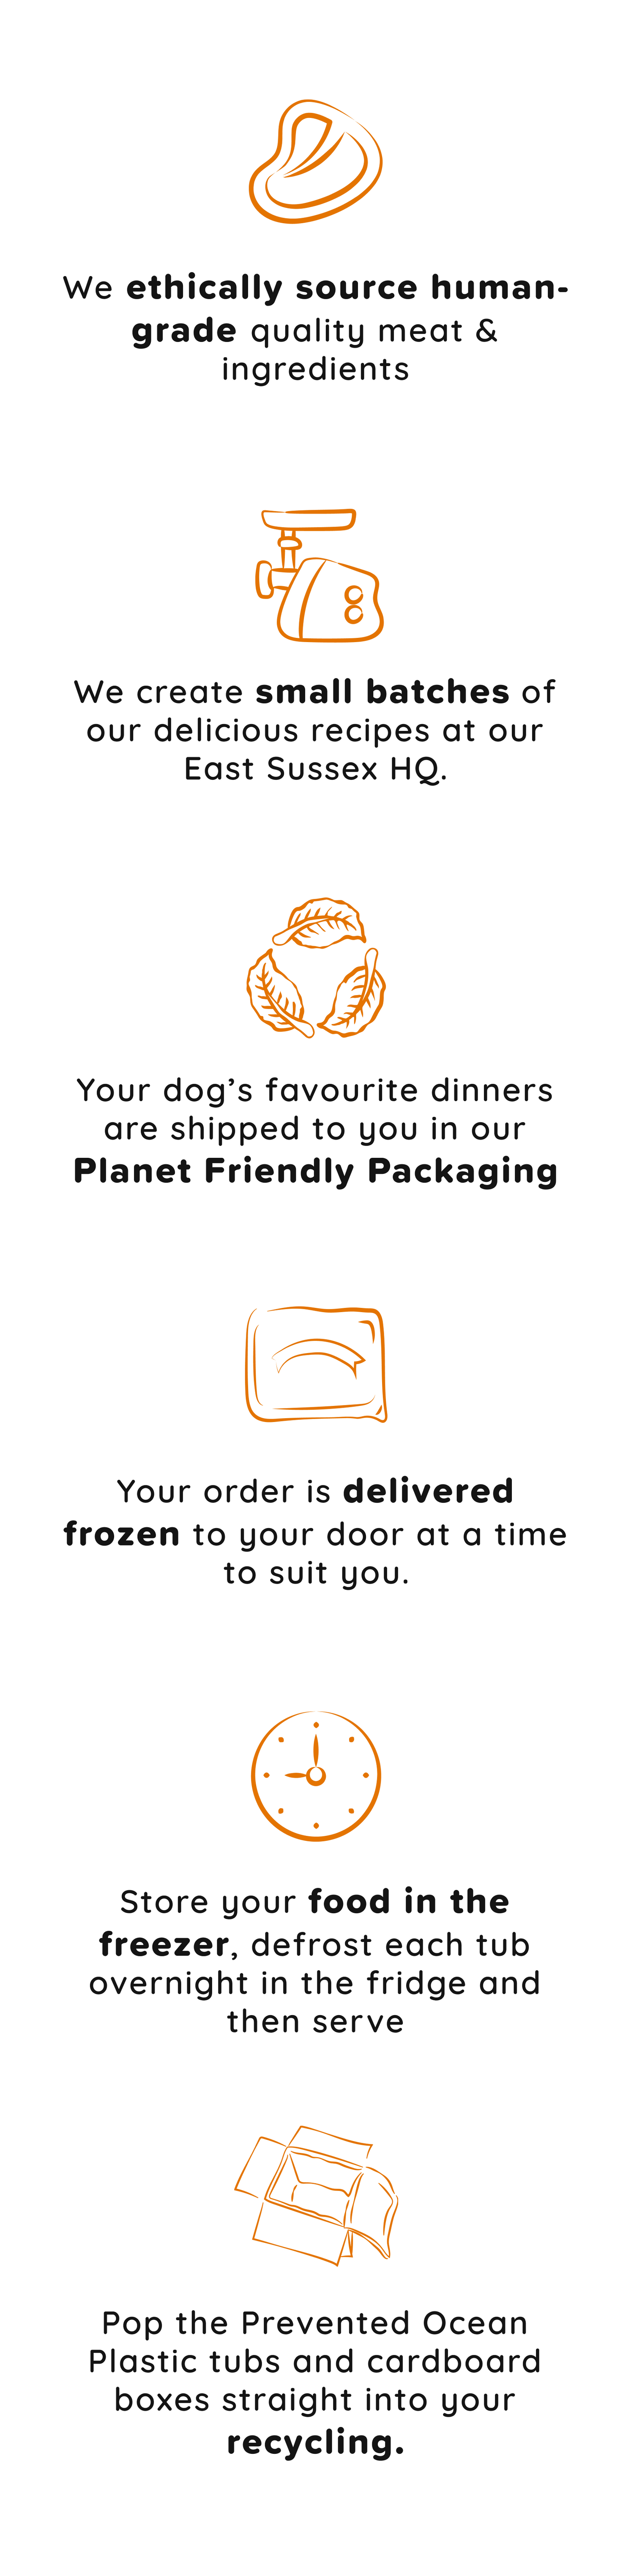  We ethically source human-grade quality meat & ingredients - We create small batches of our delicious recipes in East Sussex - Your dog’s favourite dinners are shipped to you in our Planet Friendly Packaging - Your personalised order is delivered to your door at a time to suit you - Pop your food in the freezer and when done reuse or recycle your food tubs & boxes - Have your wool liners, send them back, save on your next order & we will re-use them again & again 